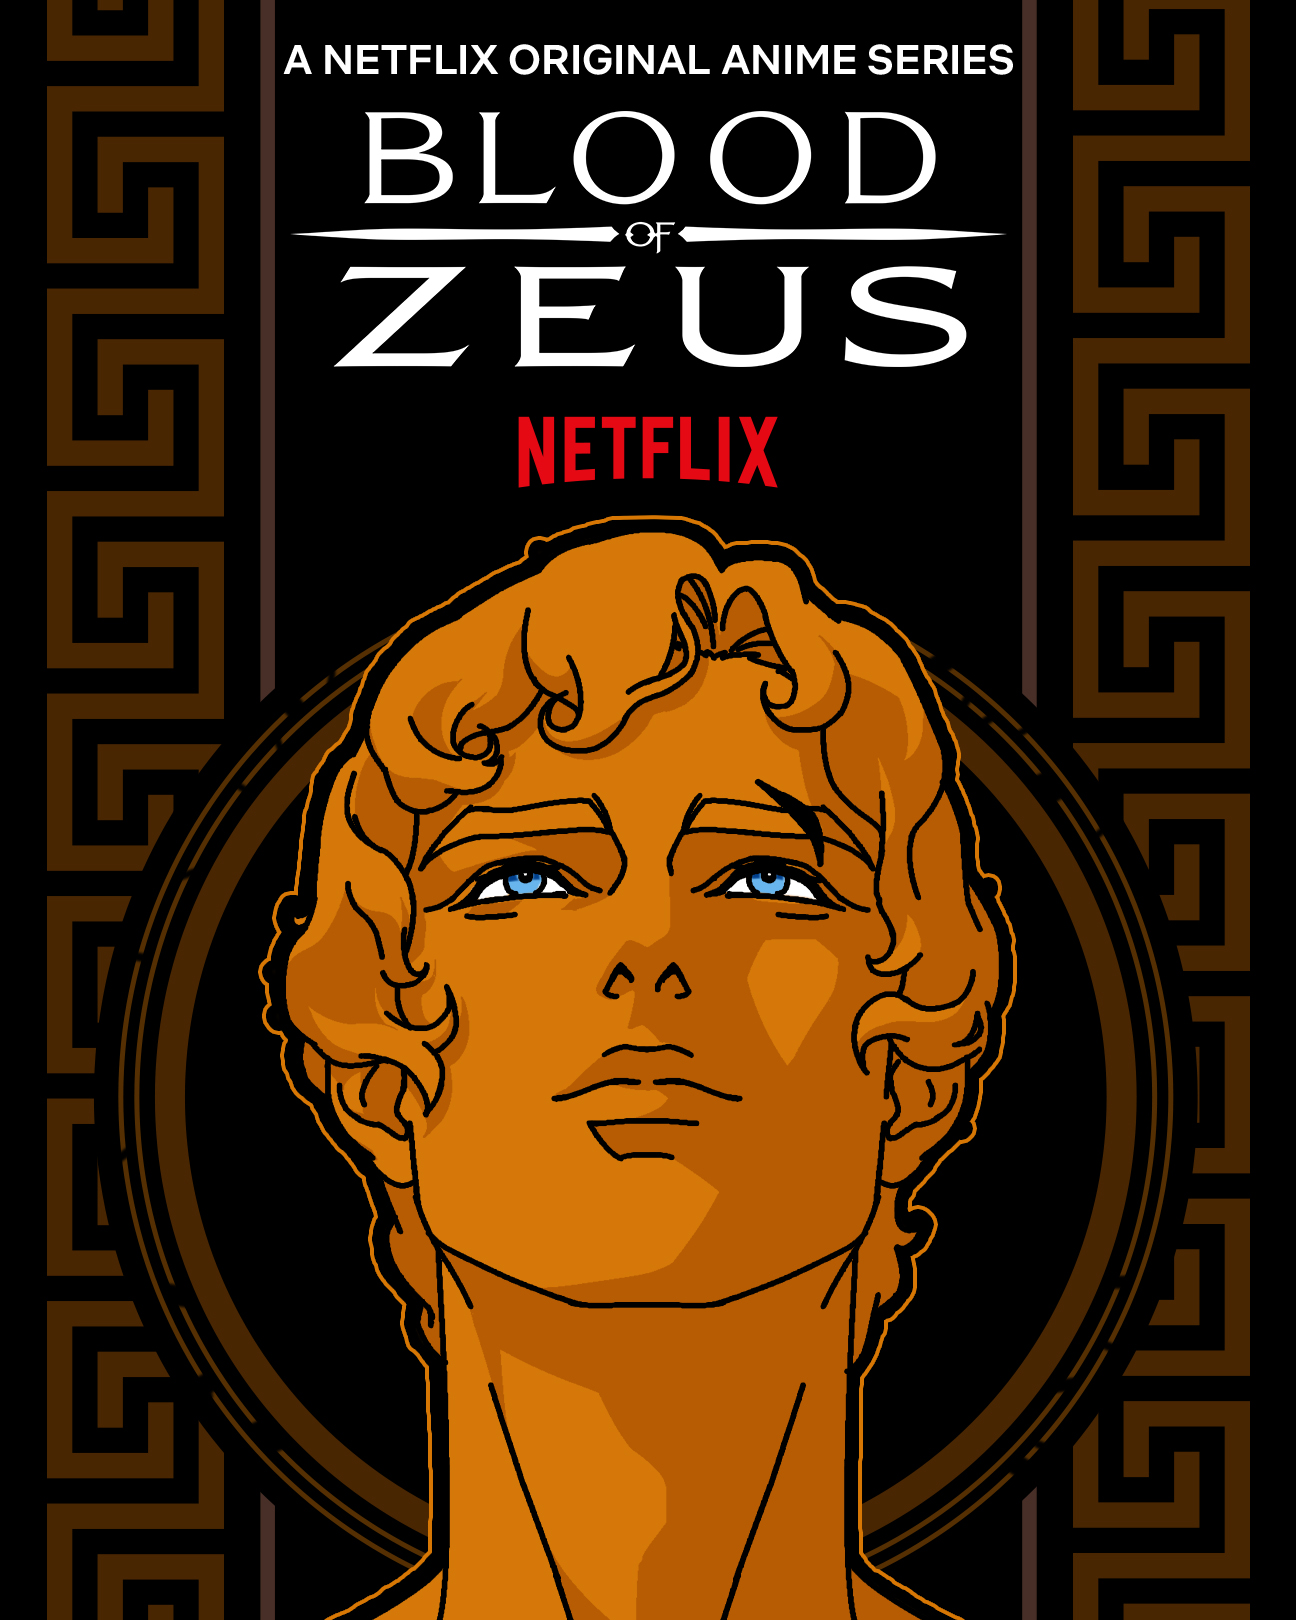 Netflix to Launch 40 New Anime Shows After 'Blood of Zeus' Win - Bloomberg